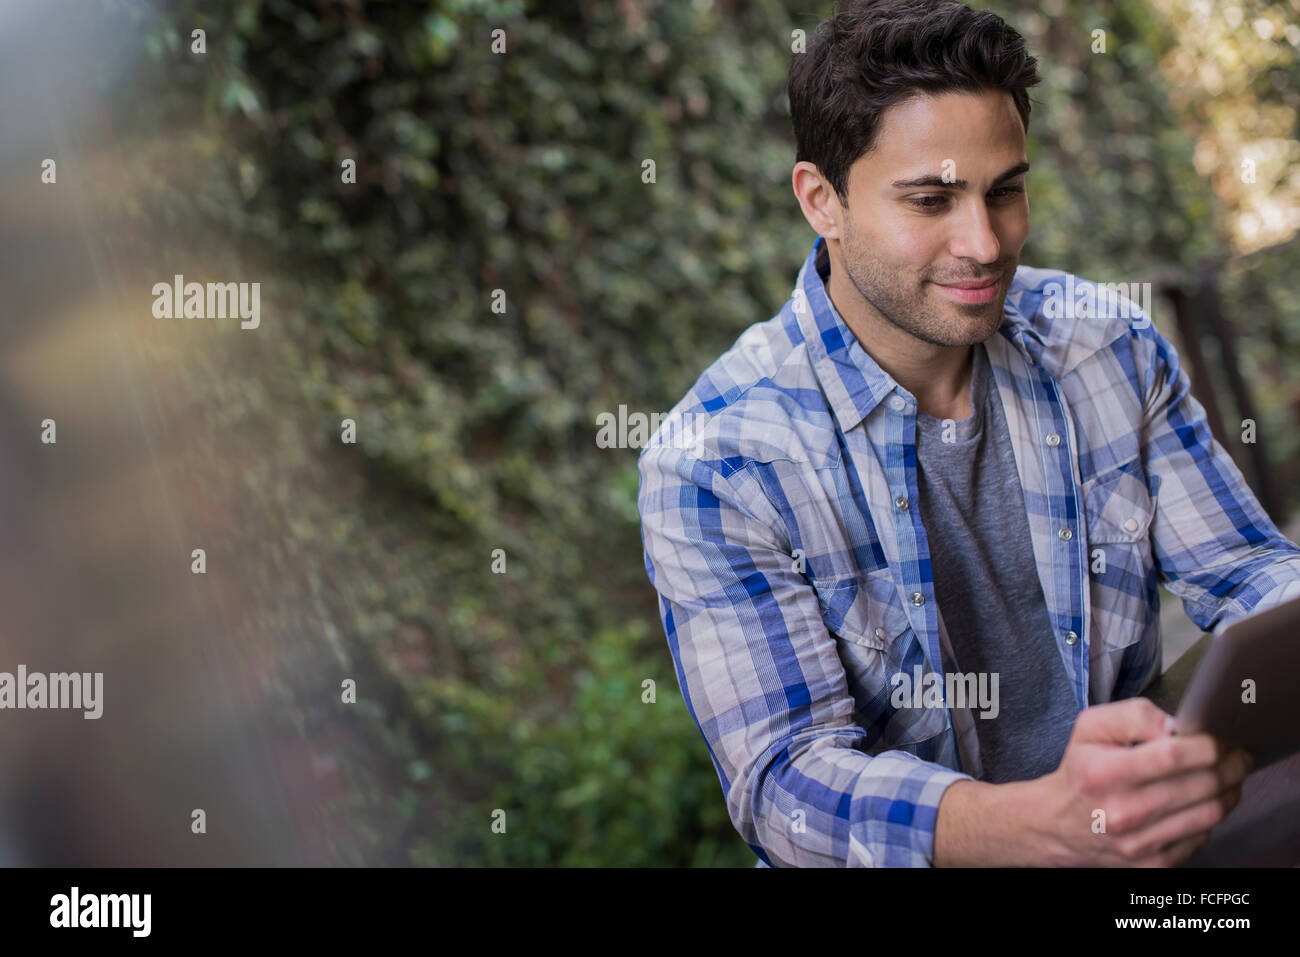 A man sitting at a cafe table outdoors, using a digital tablet. Stock Photo